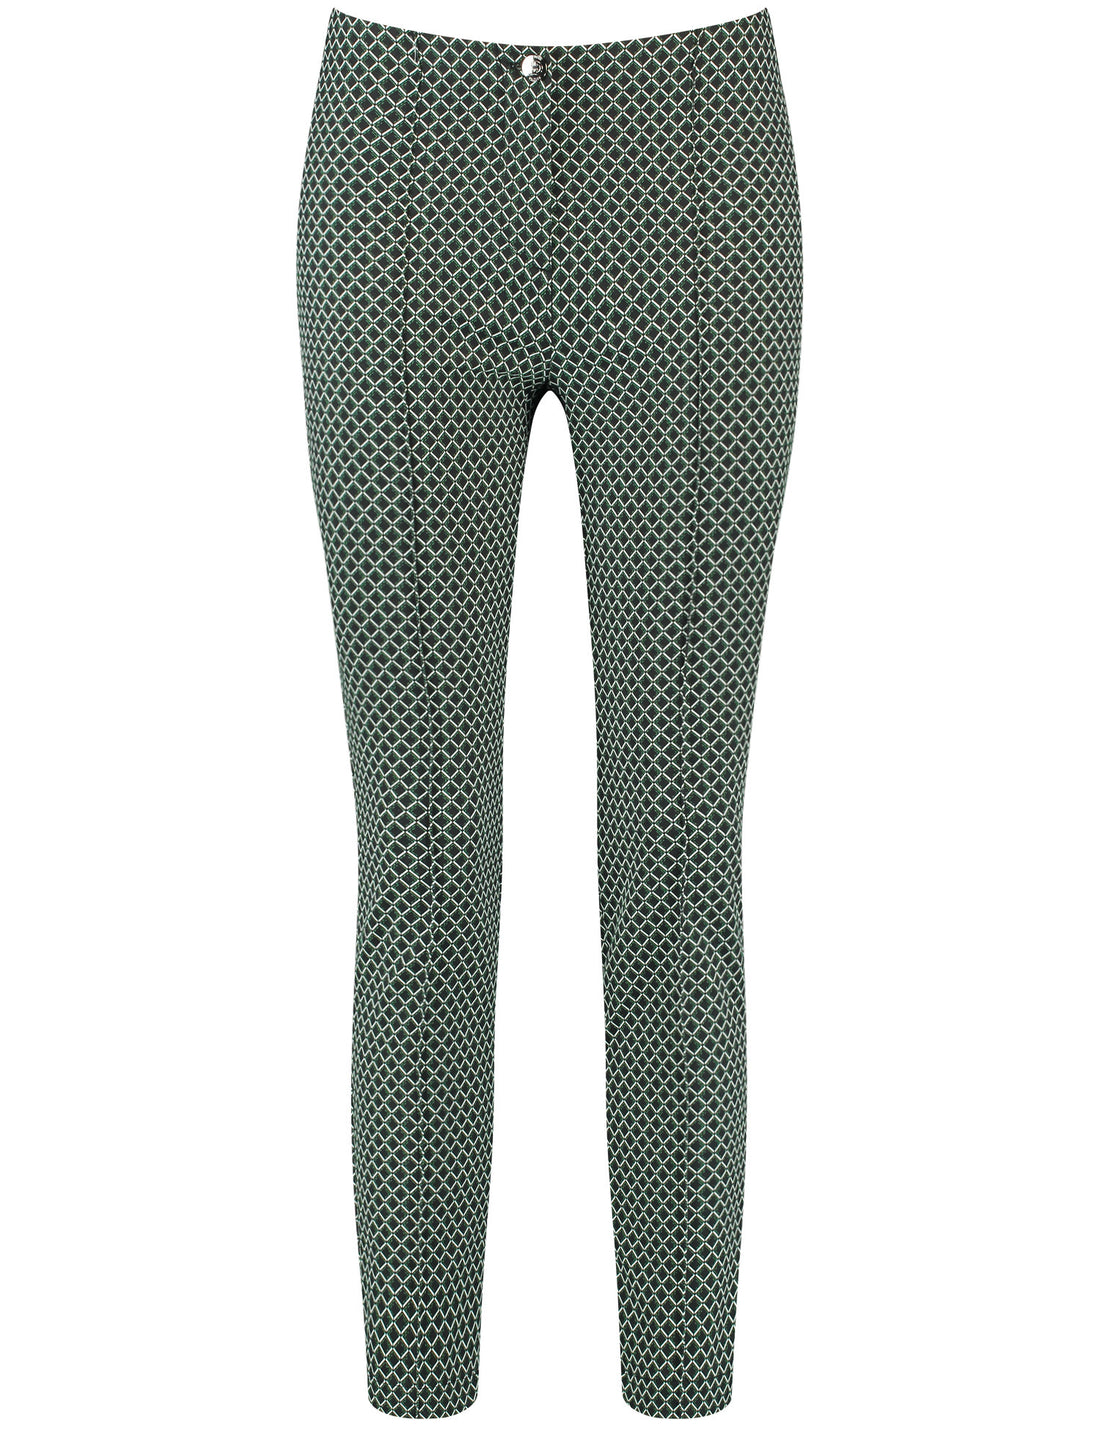 Patterned 7/8-Length Trousers, Slim Fit